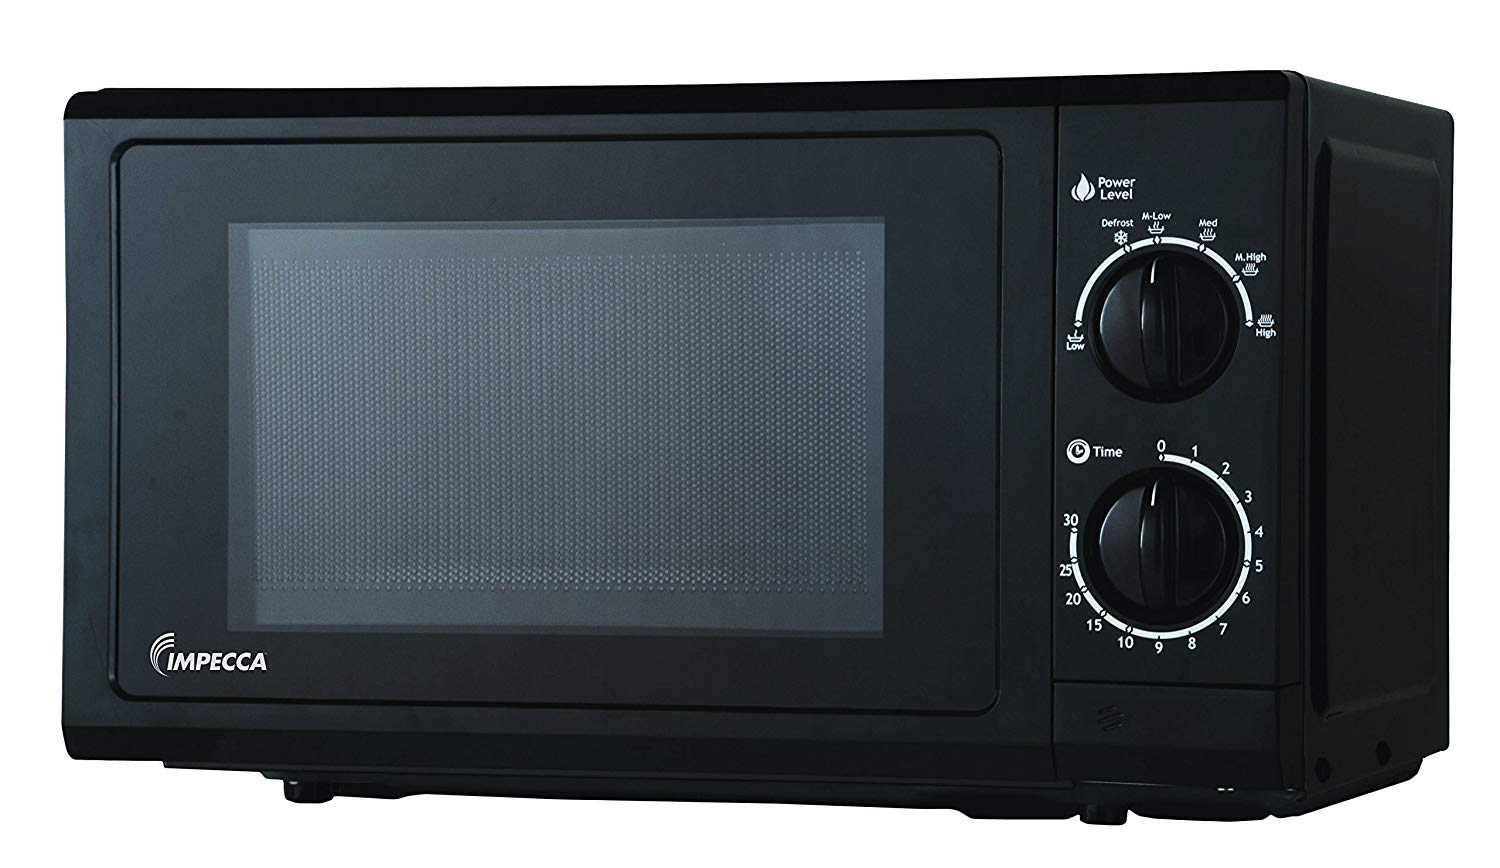 Impecca CM0674 700-Watts Countertop Microwave Oven, 120V 0.6 Cubic Feet, Black